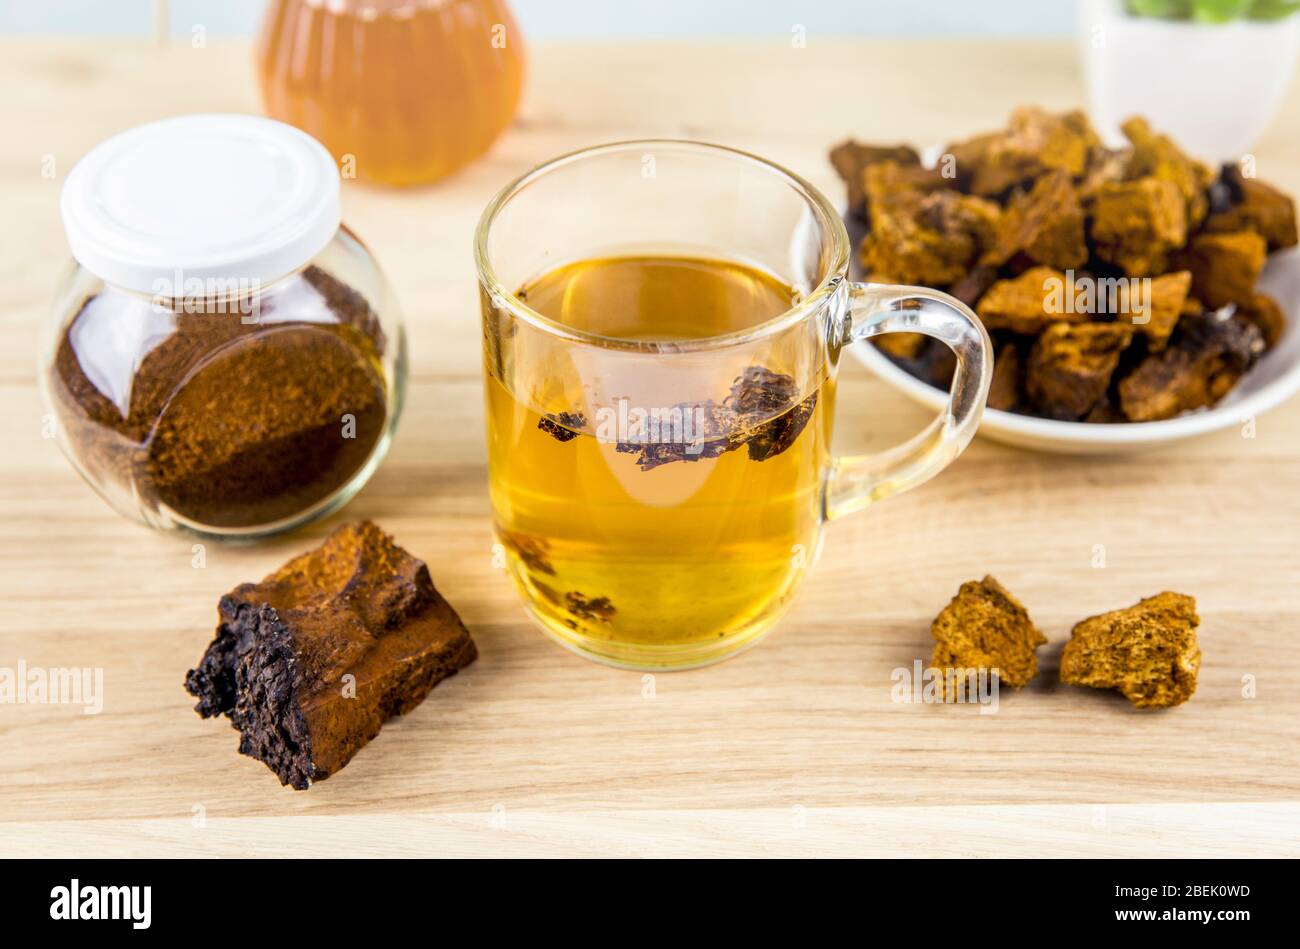 Wild natural chaga mushroom from birch tree, Inonotus obliquus pieces in tea glass on wooden table indoors home. Alternative traditional medicine. Stock Photo